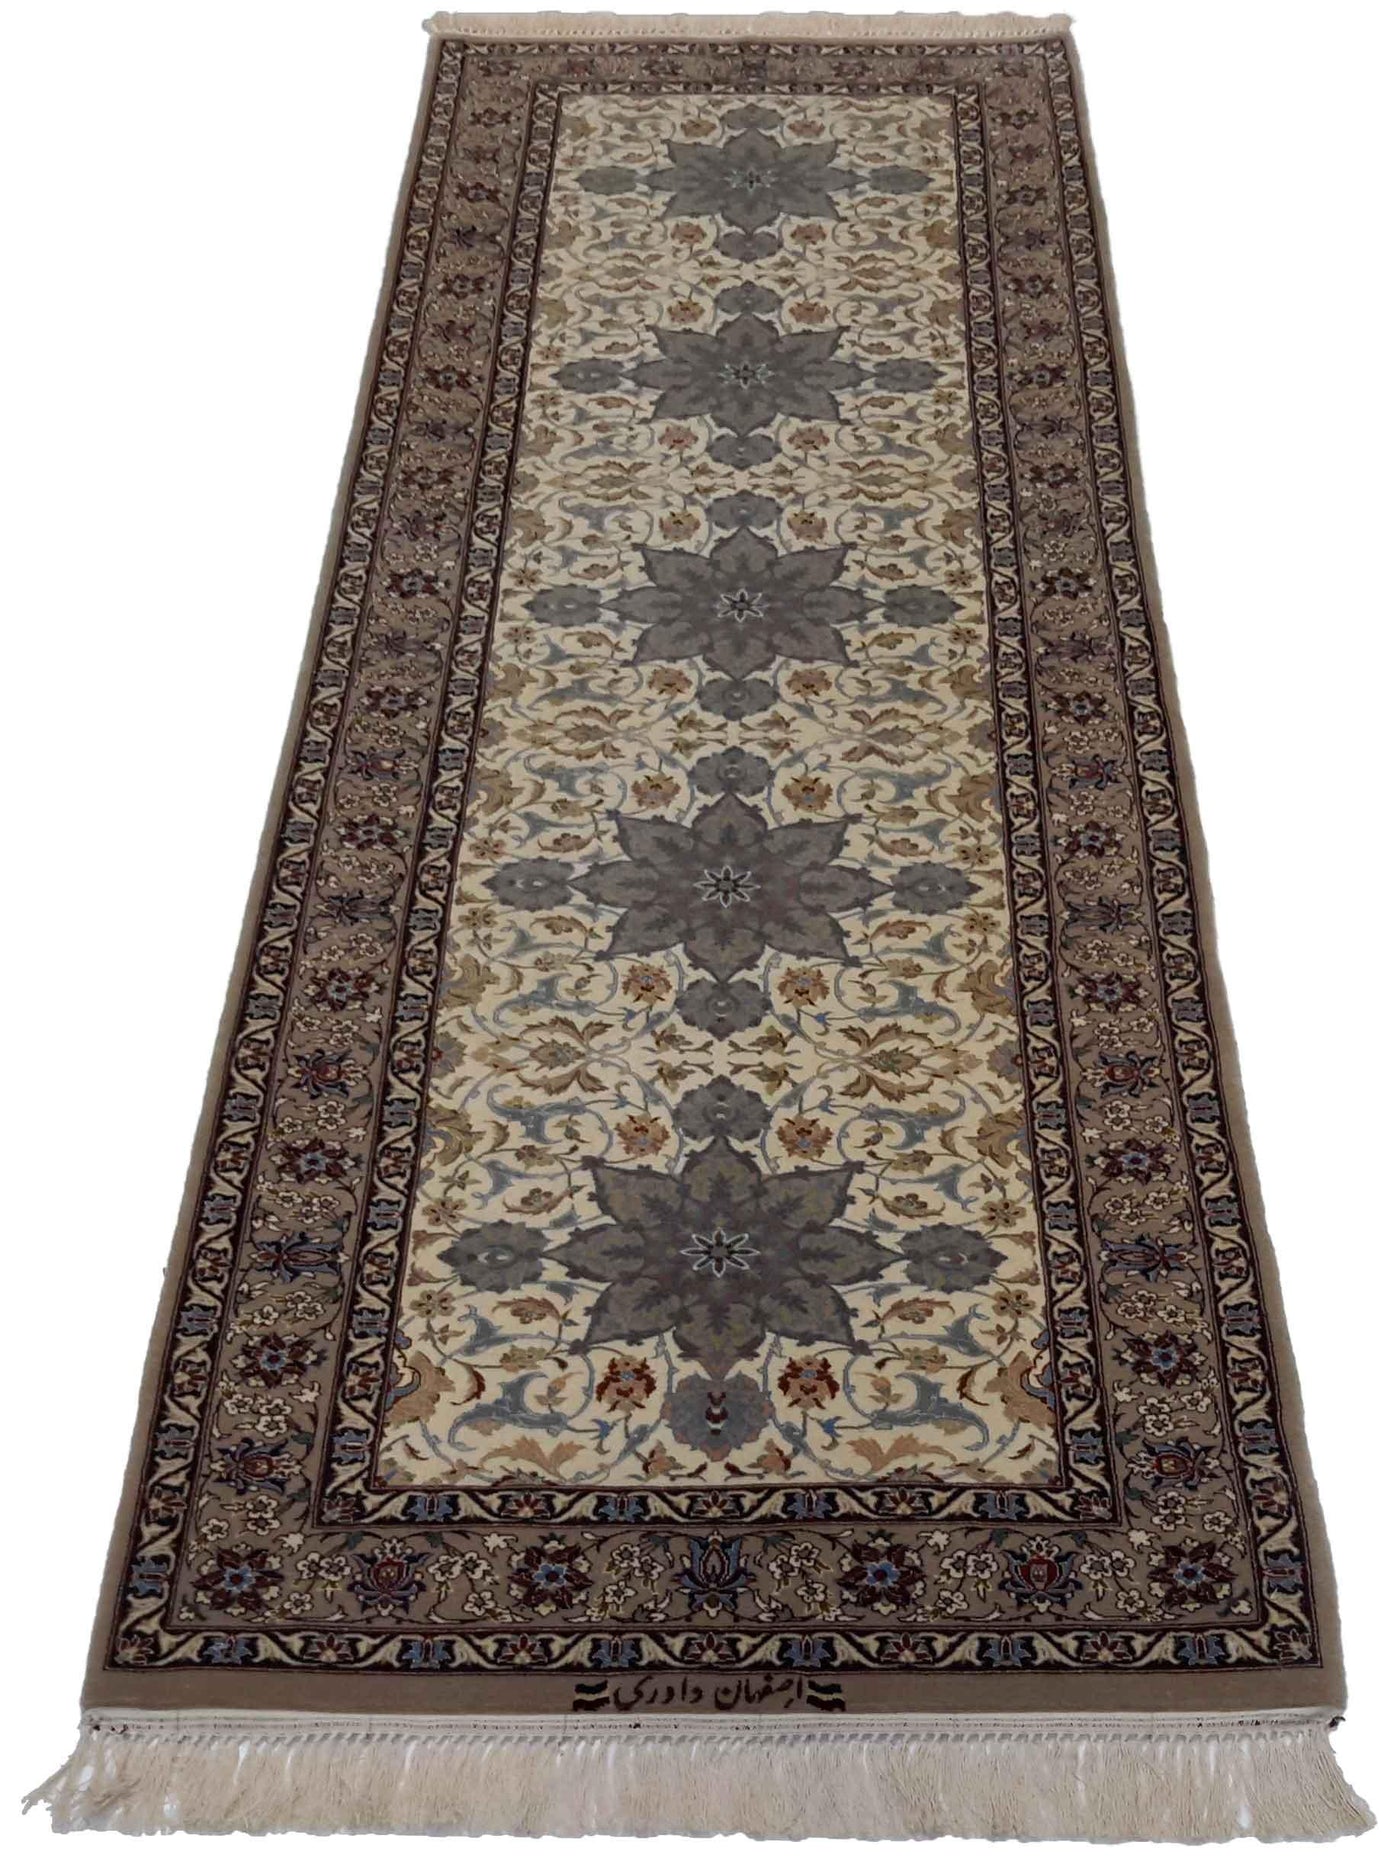 Canvello Hand Made Formal All Over Persian Isfahan Rug - 2'6'' X 8'4''